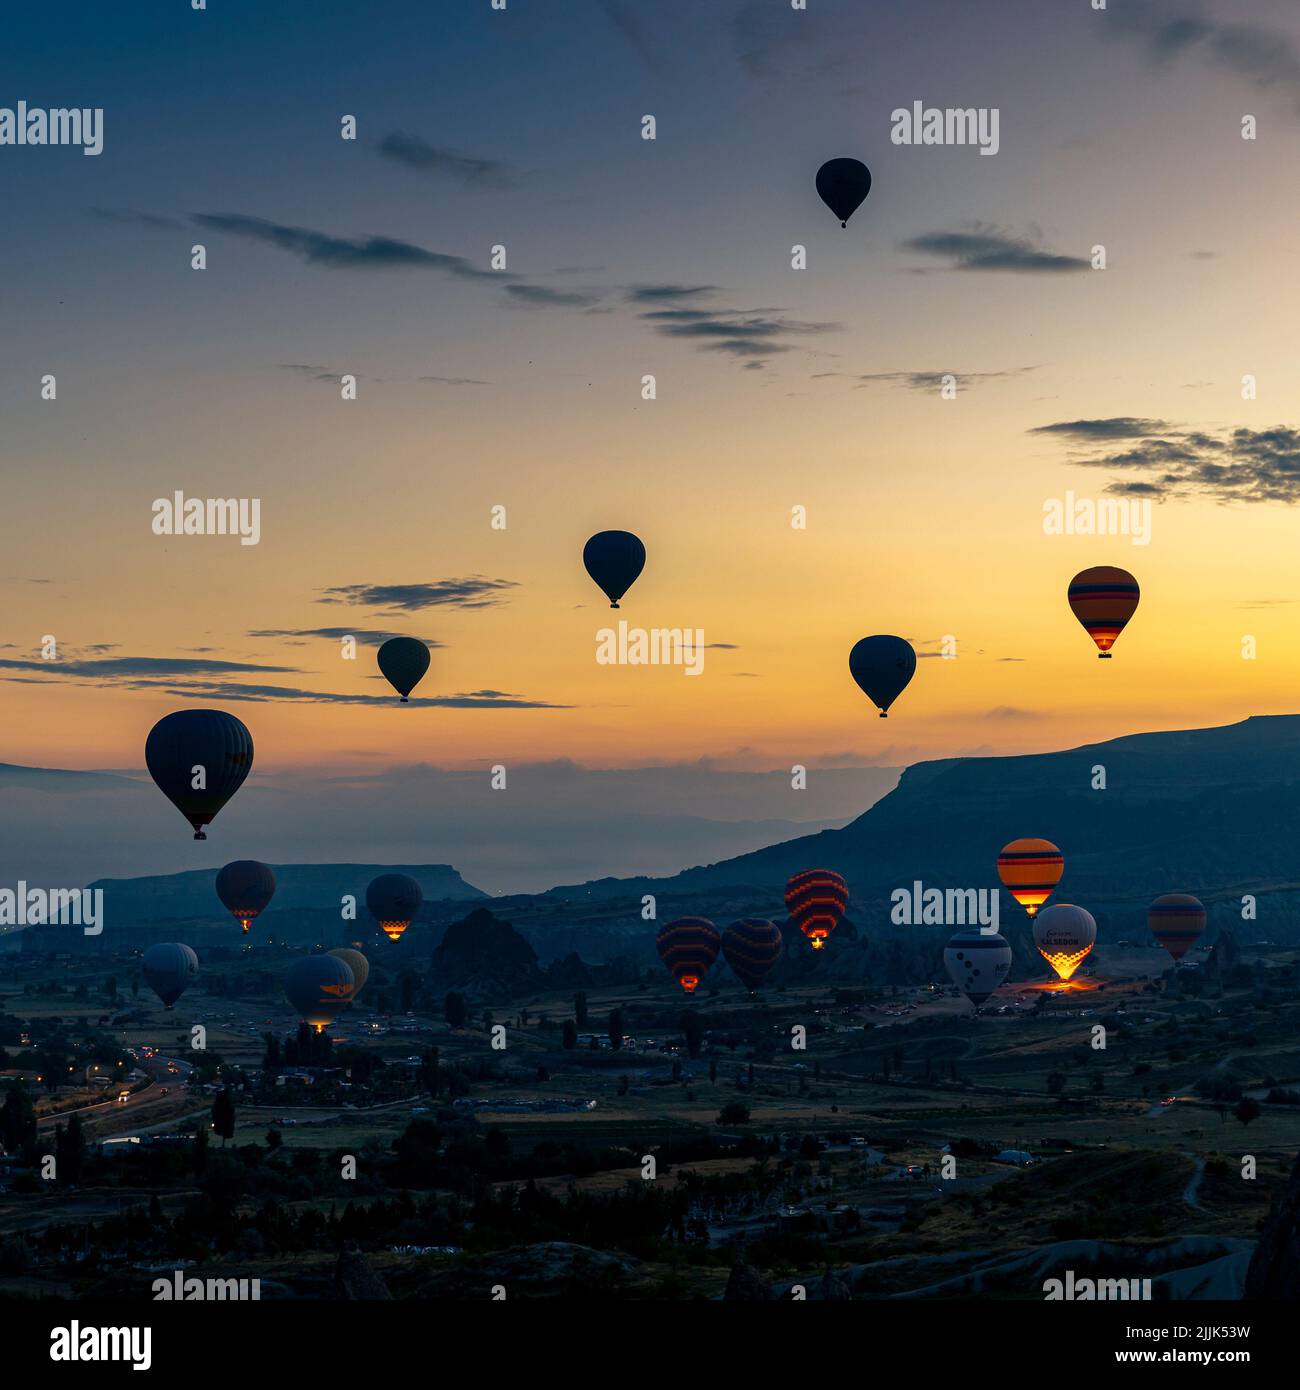 GOREME/TURKEY - June 29, 2022: hot air balloons fly over the city of goreme at sunrise. Turkey. Stock Photo